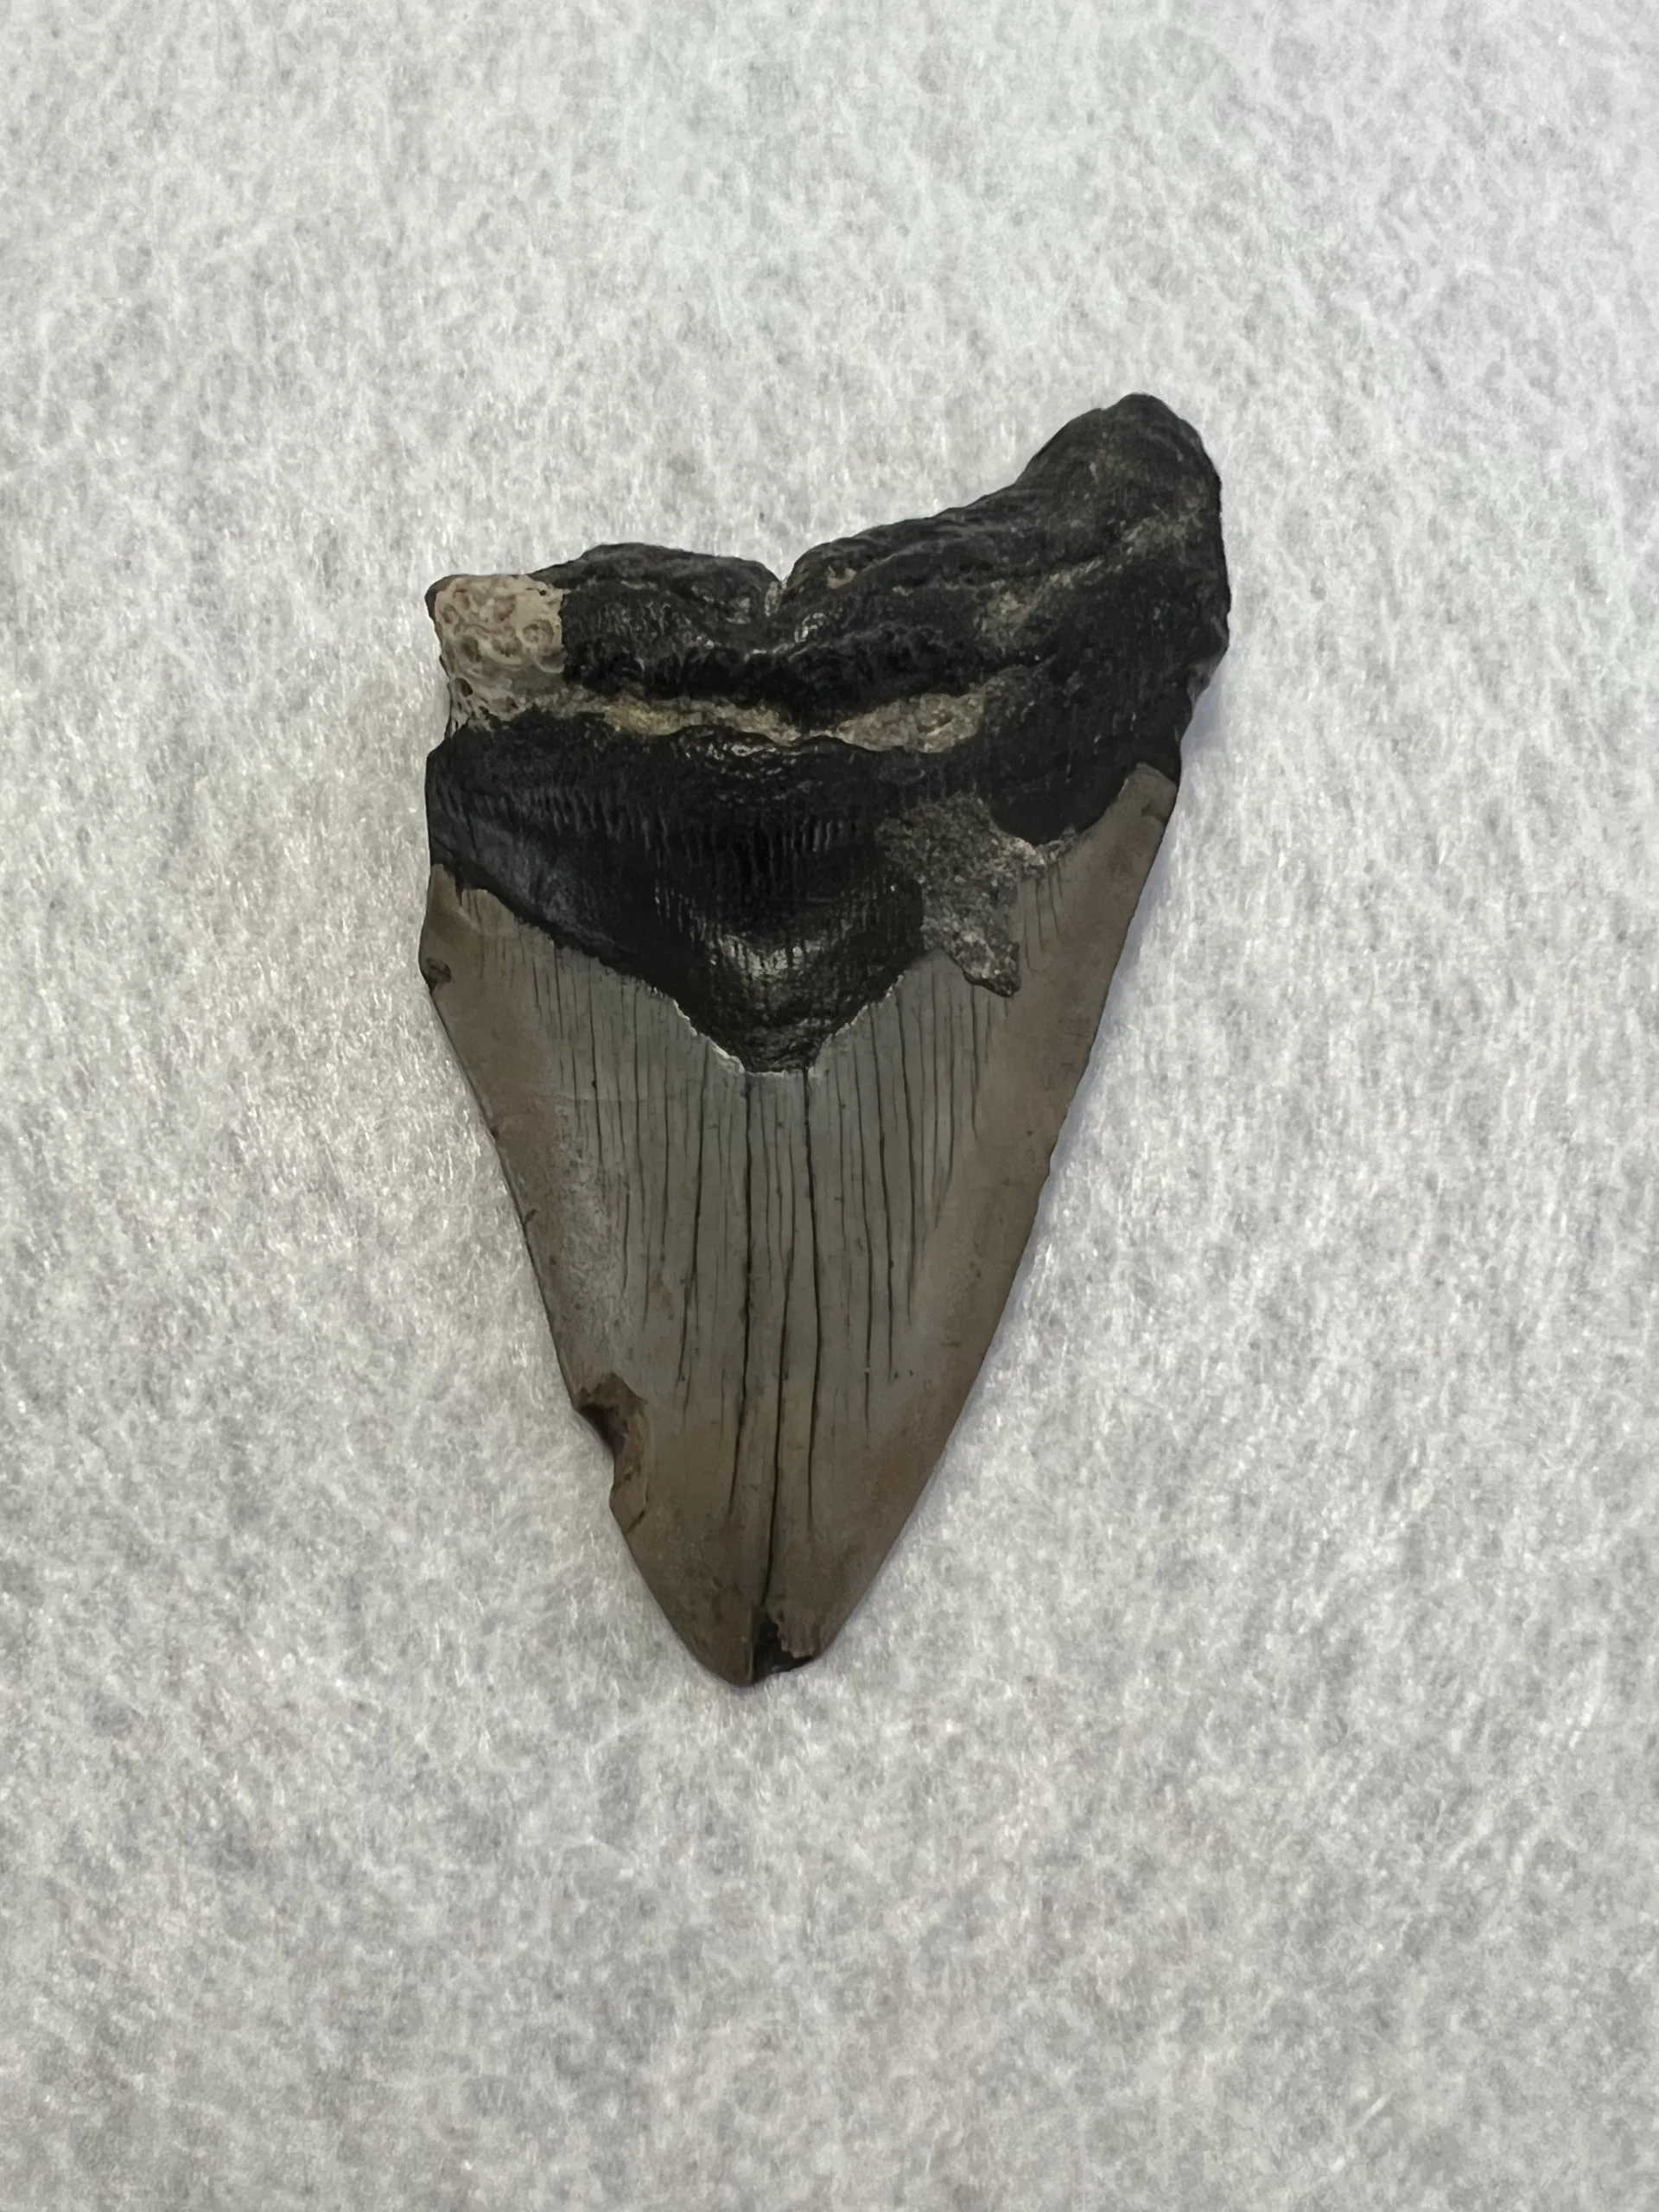 Megalodon Tooth,  South Carolina  4.50 inch Prehistoric Online